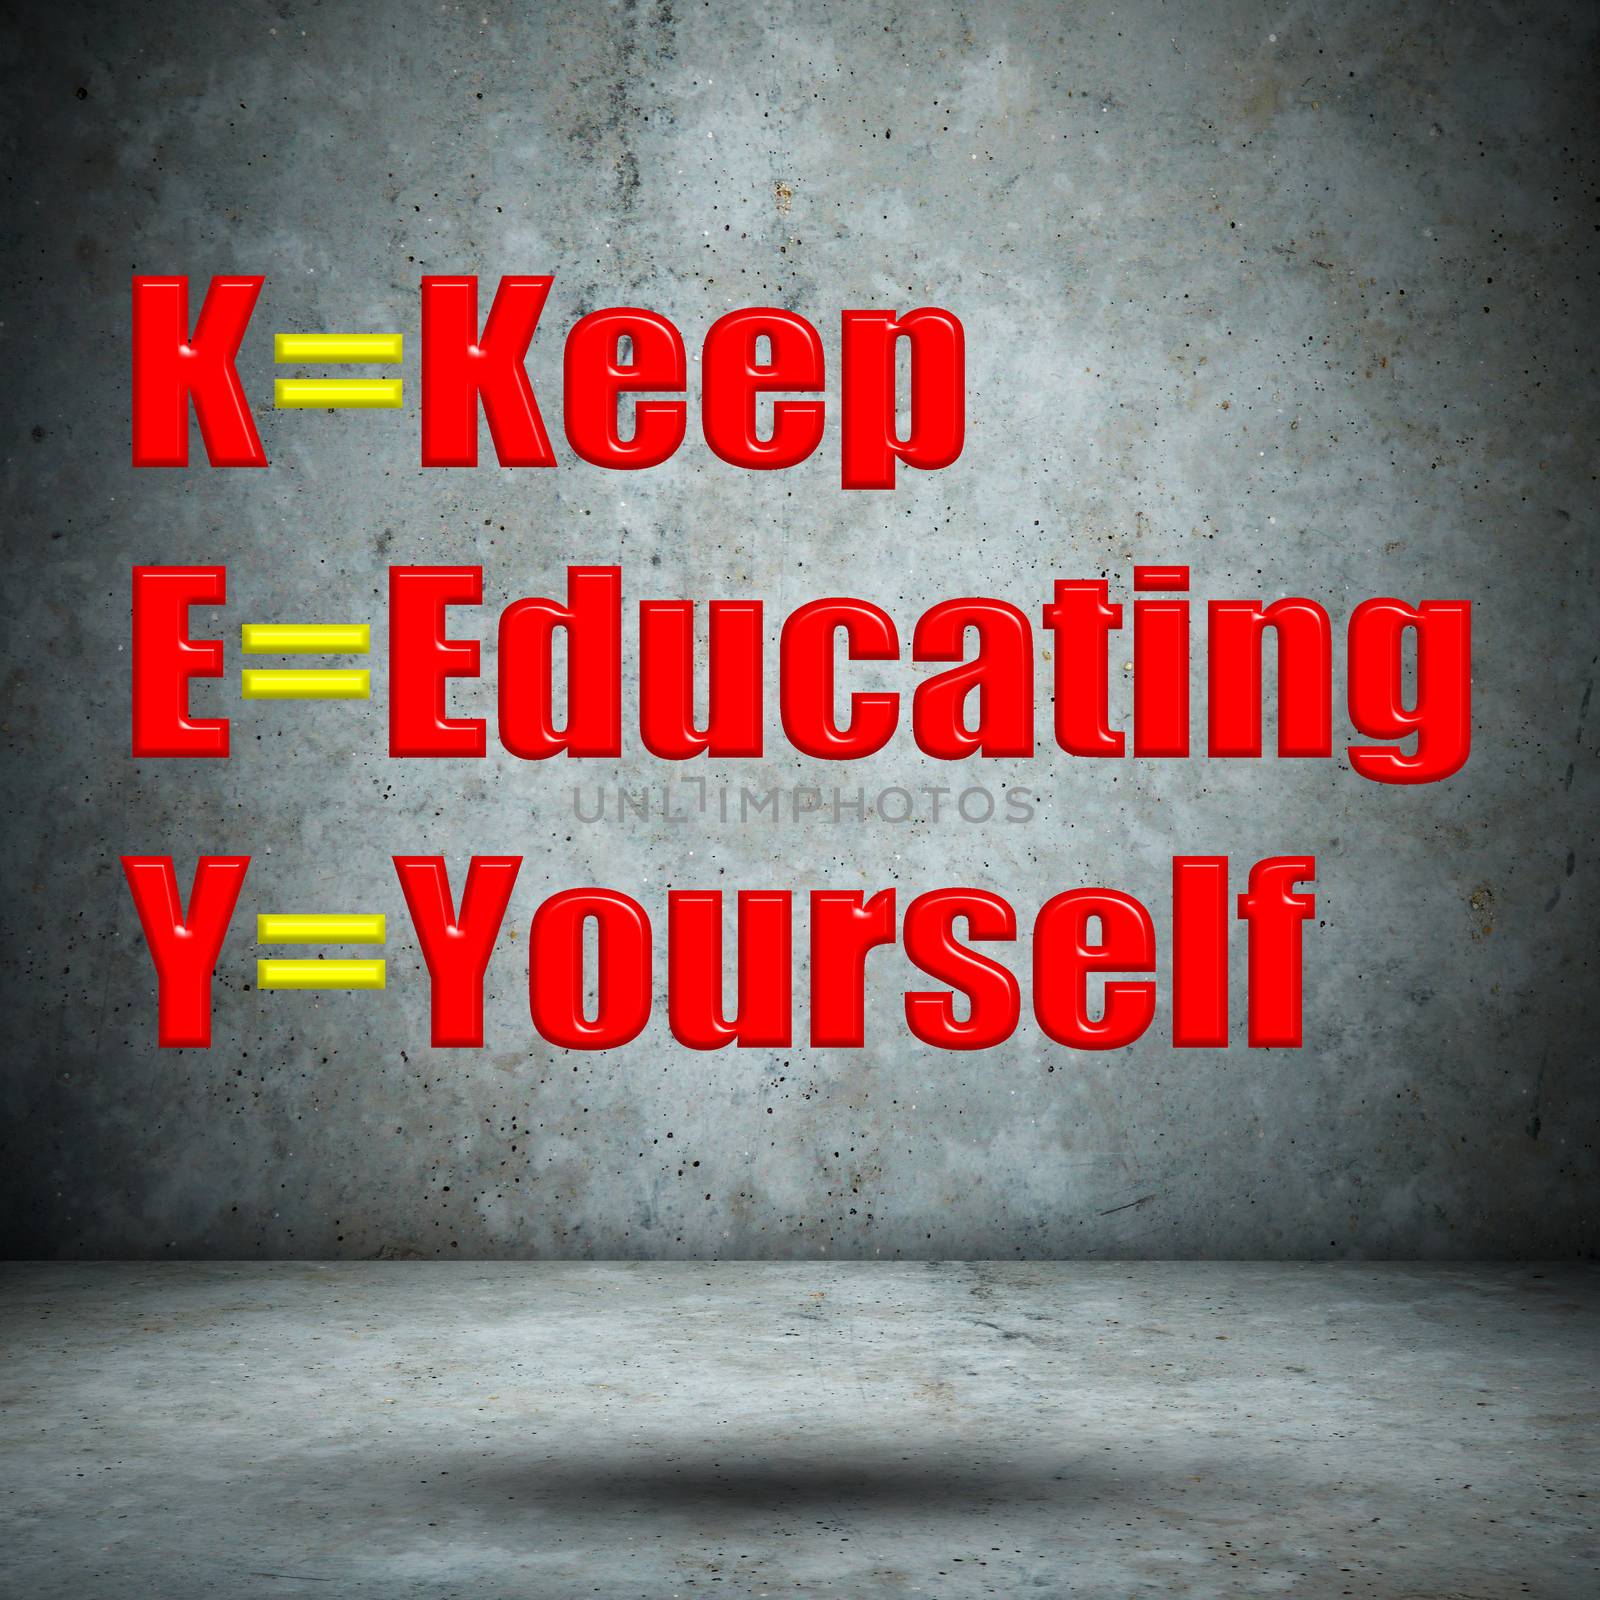 KEEP EDUCATING YOURSELF concrete wall by tuk69tuk